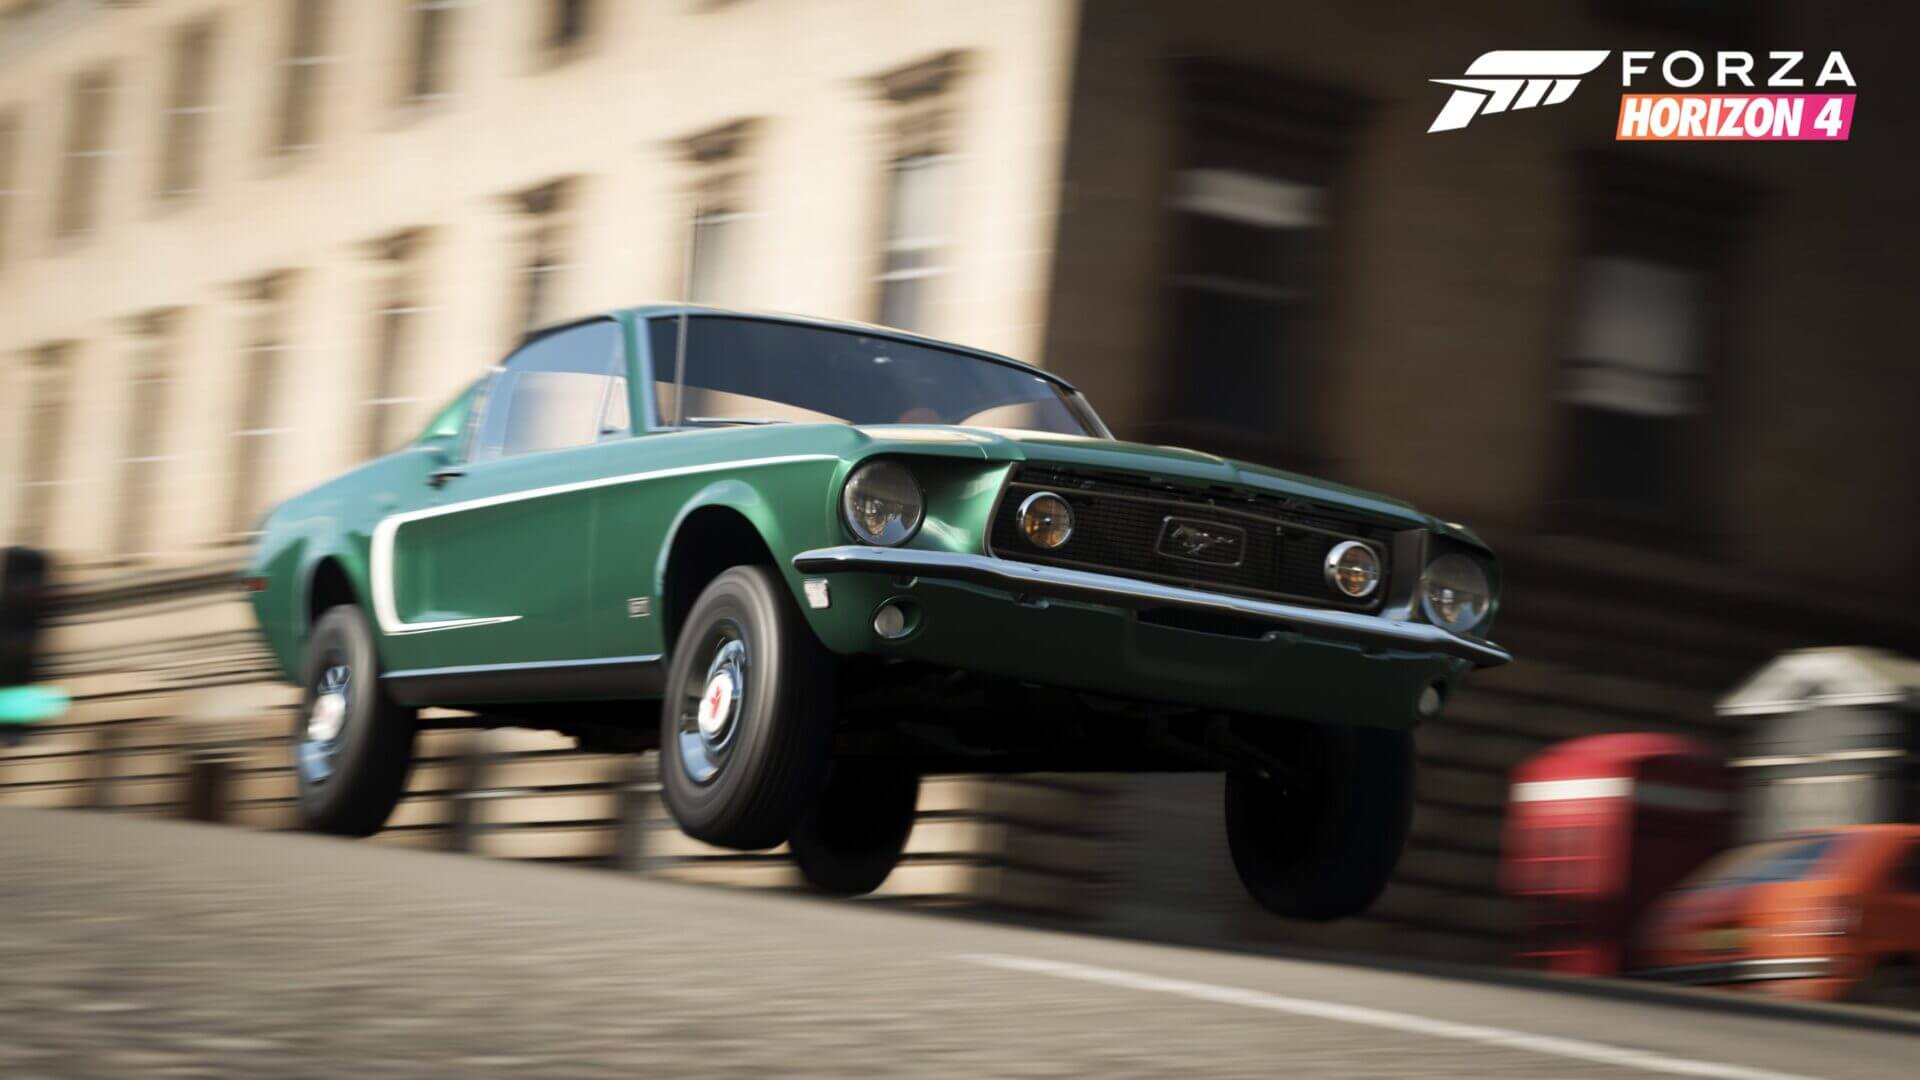 Forza horizon 4 ford. Форза 5 Ford Mustang. Форд Мустанг Forza Horizon 5. Форд Мустанг Форза Хоризон 4. Forza Horizon 4 Ford Mustang.